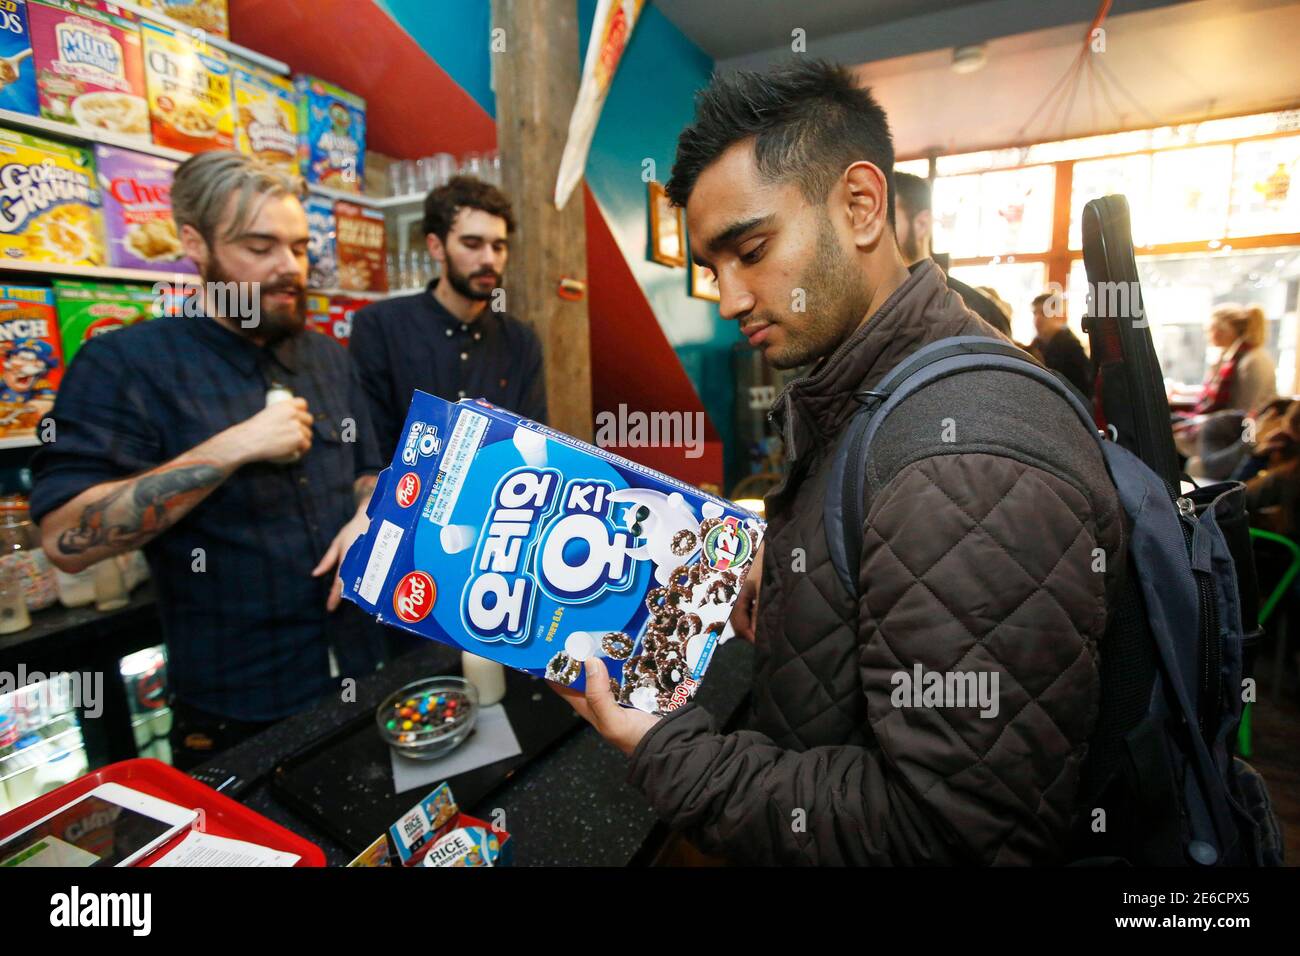 A customer inspects a box of imported cereal at the "Cereal Killer Cafe" in  east London December 10, 2014. Identical twin brothers hope they have  ticked the right boxes, and ordered in